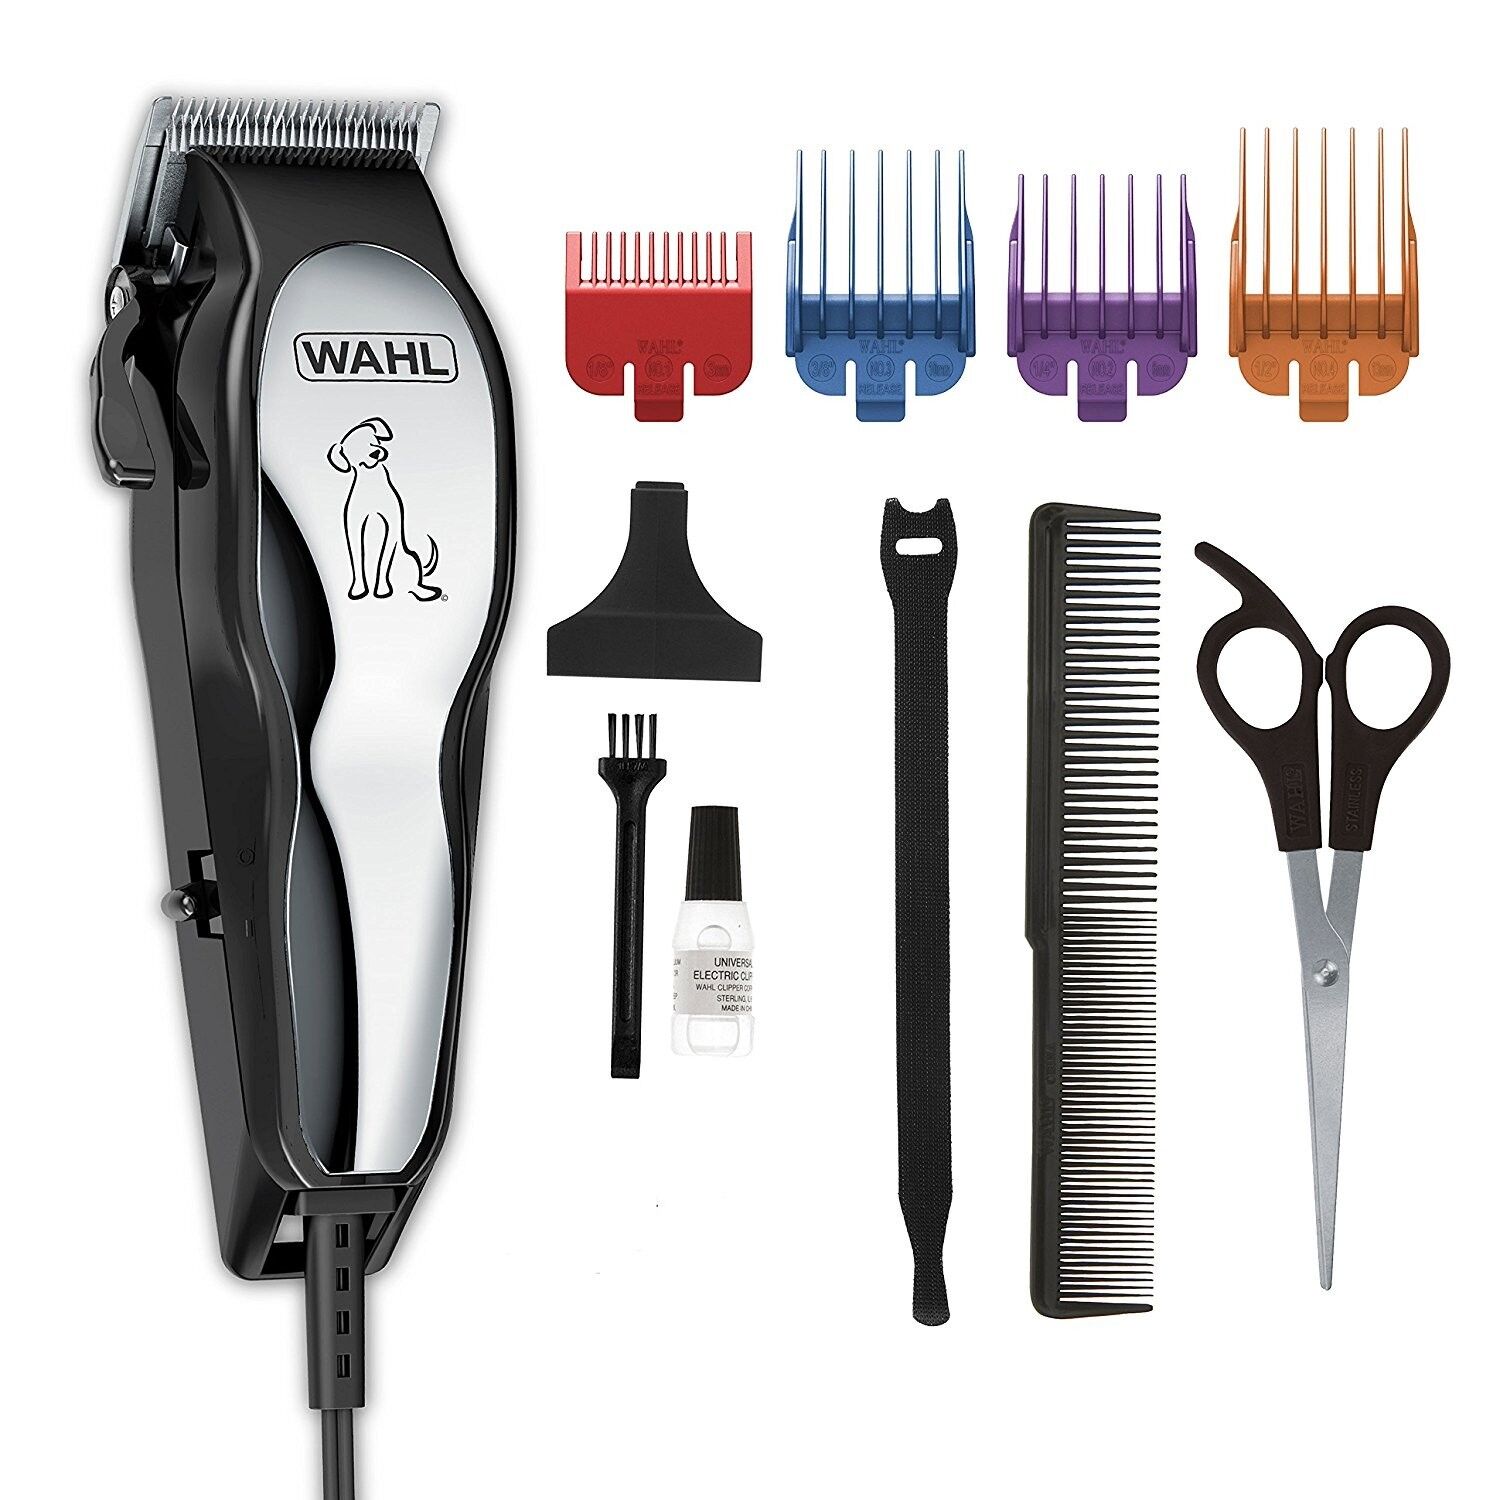 Clippers Pet Dog Grooming Kit Electric Trimmer Clipper Hair Scissors Shears Set 